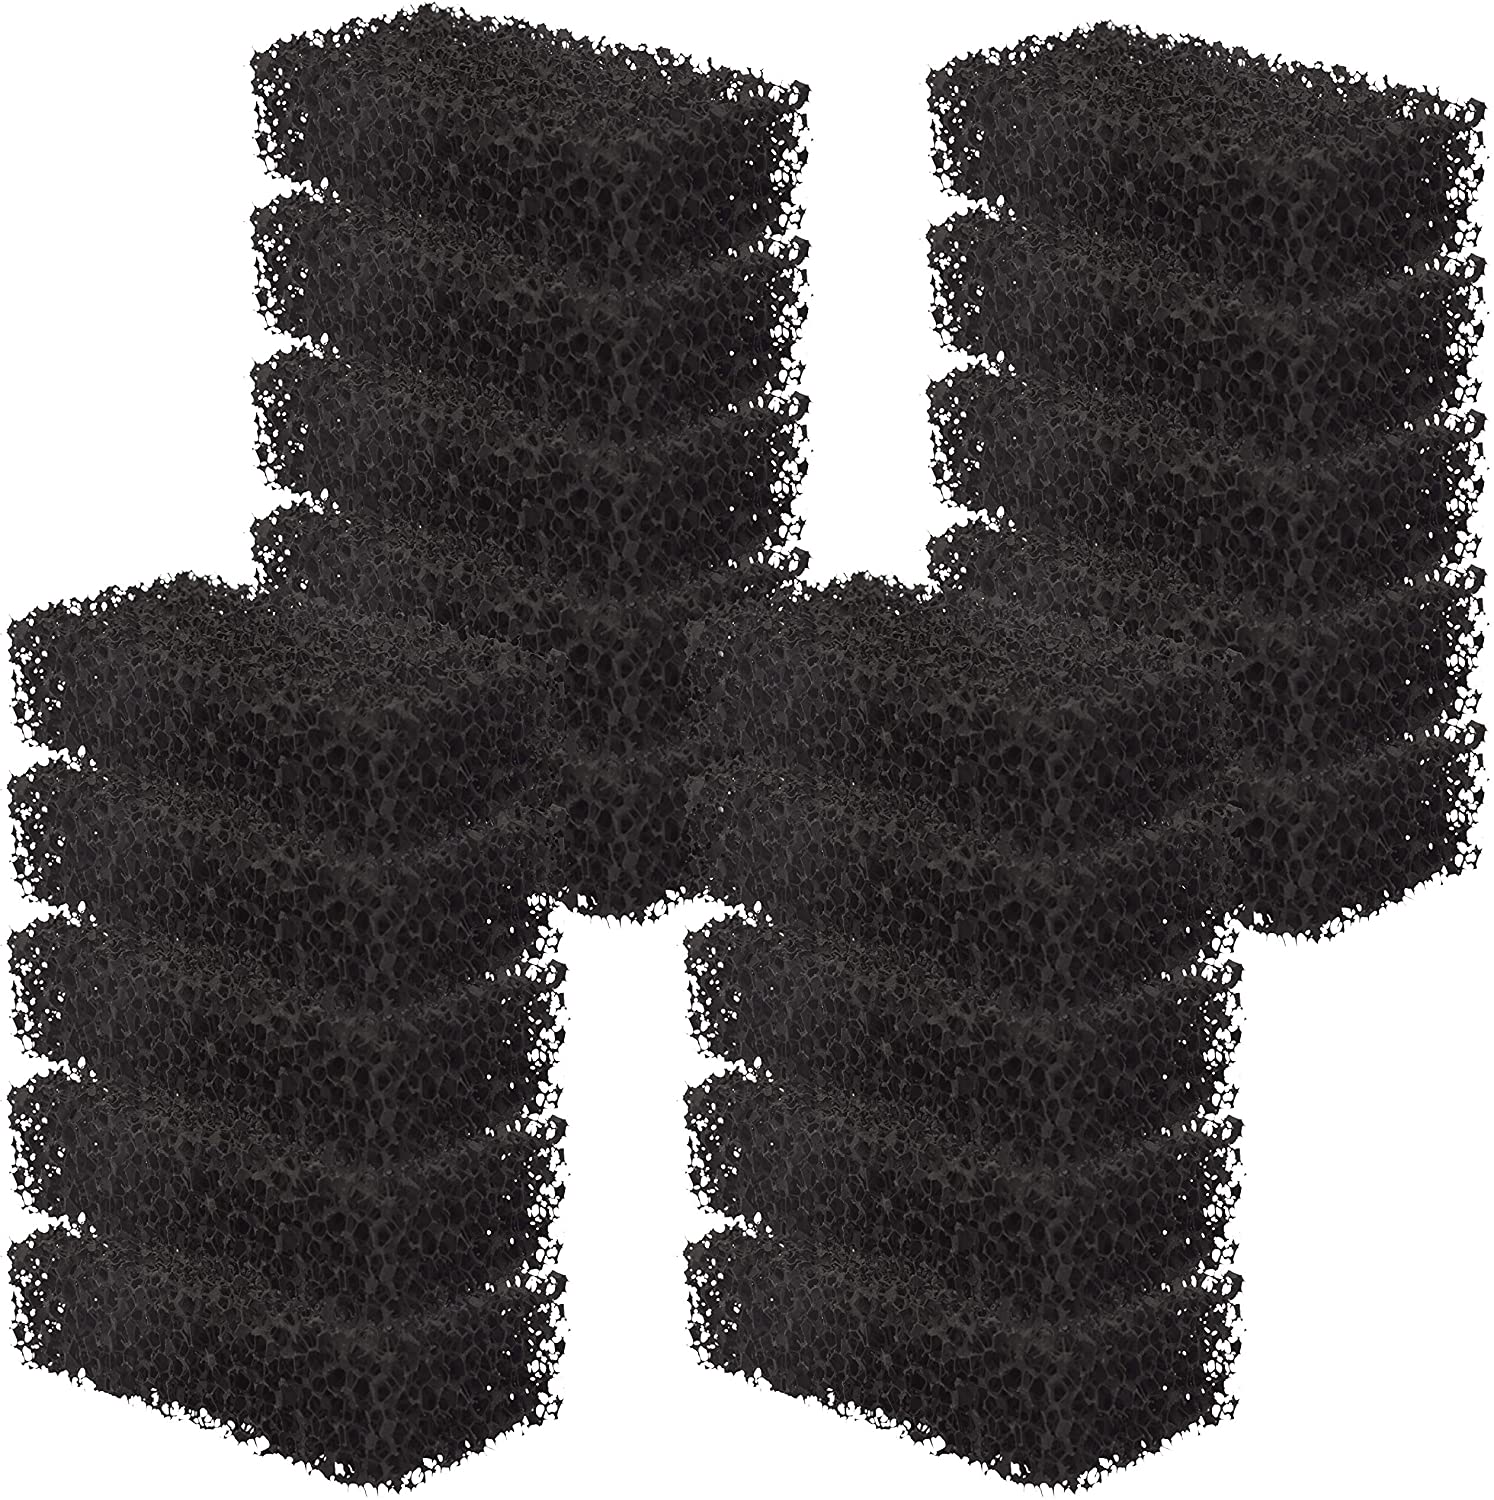 LTWHOME Replacment Carbon Foam Filter Pads Fish Tank Media Fits for Juwel Compact Super Filters/S (Pack of 20)